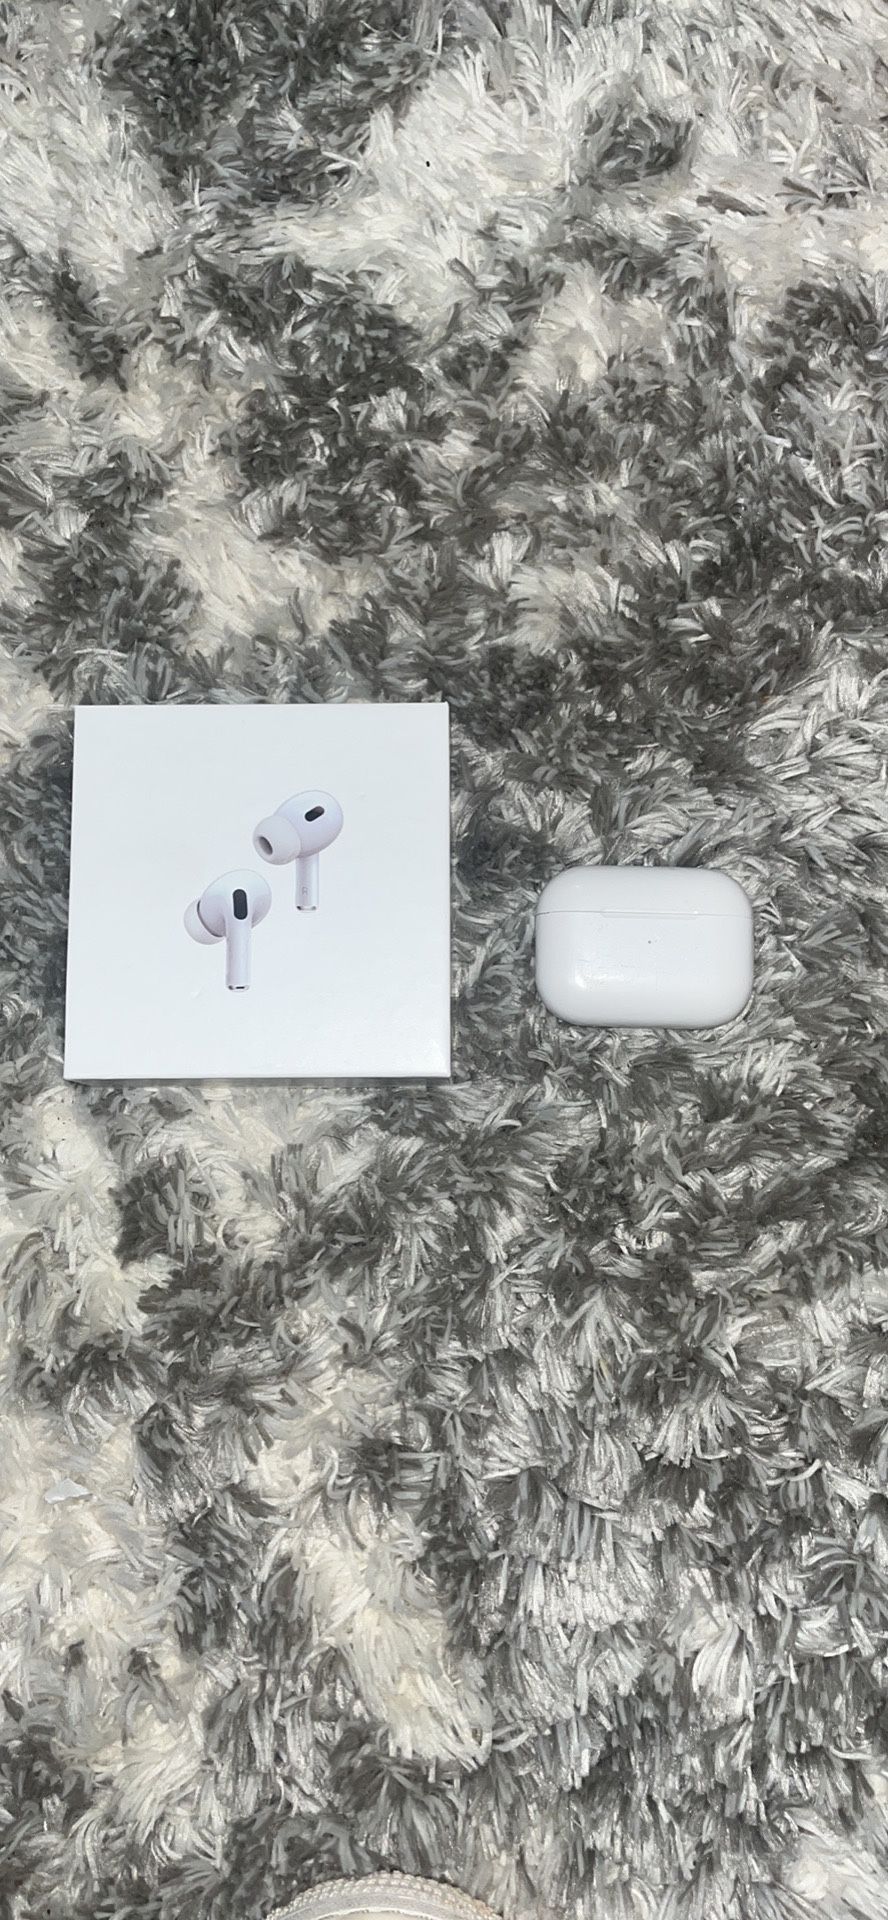 Airpods Pro’s 2 